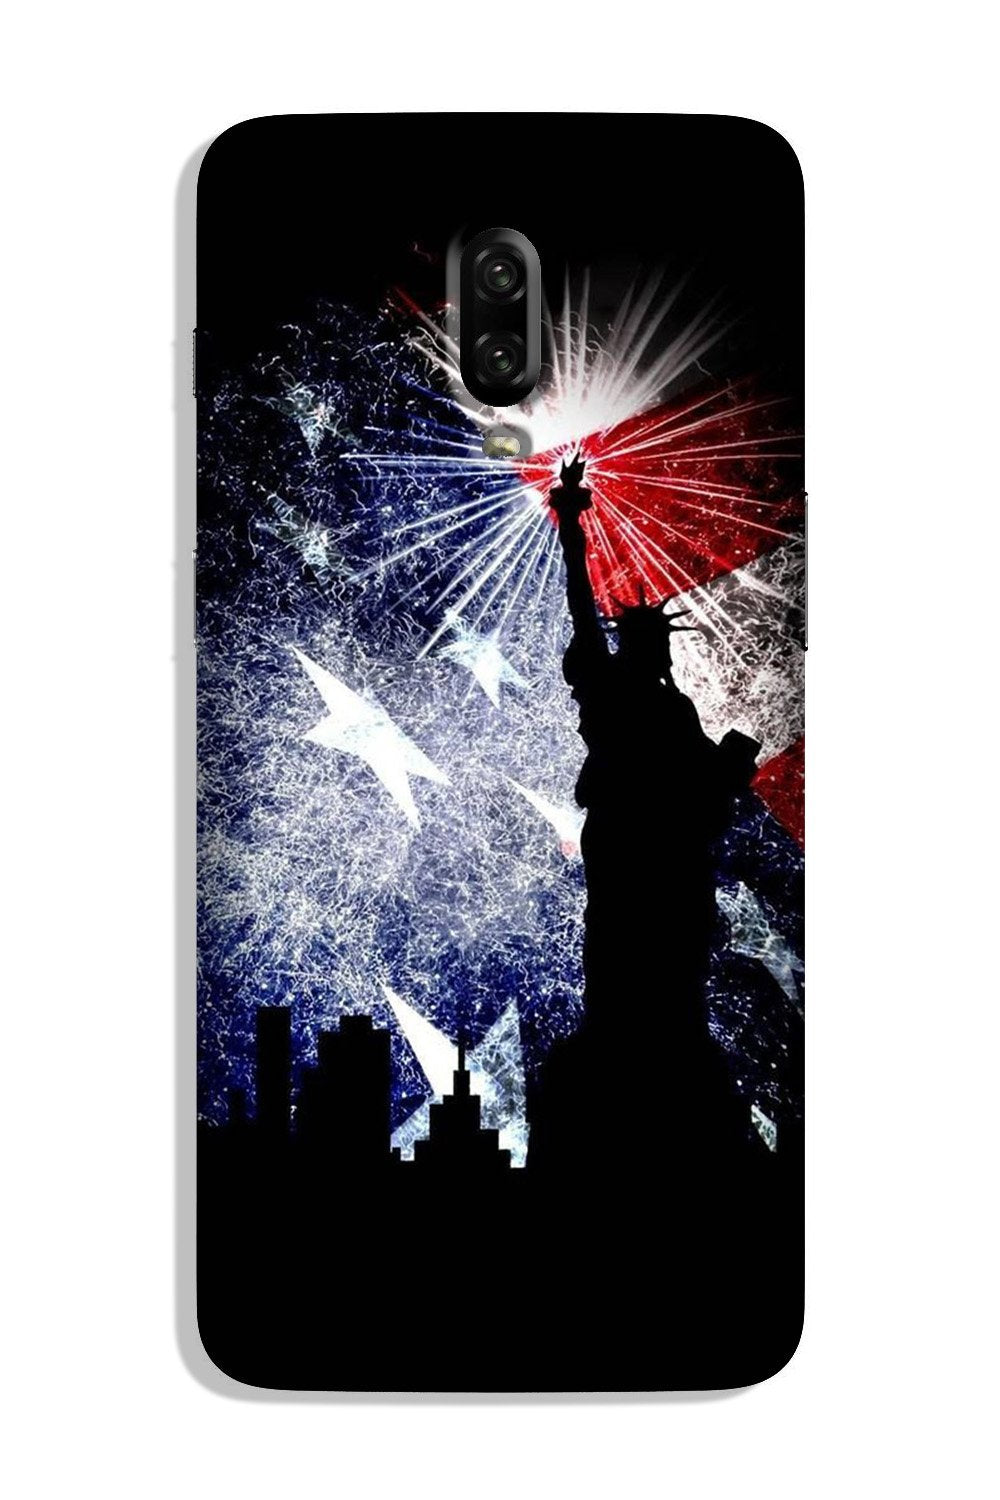 Statue of Unity Case for OnePlus 6T (Design No. 294)